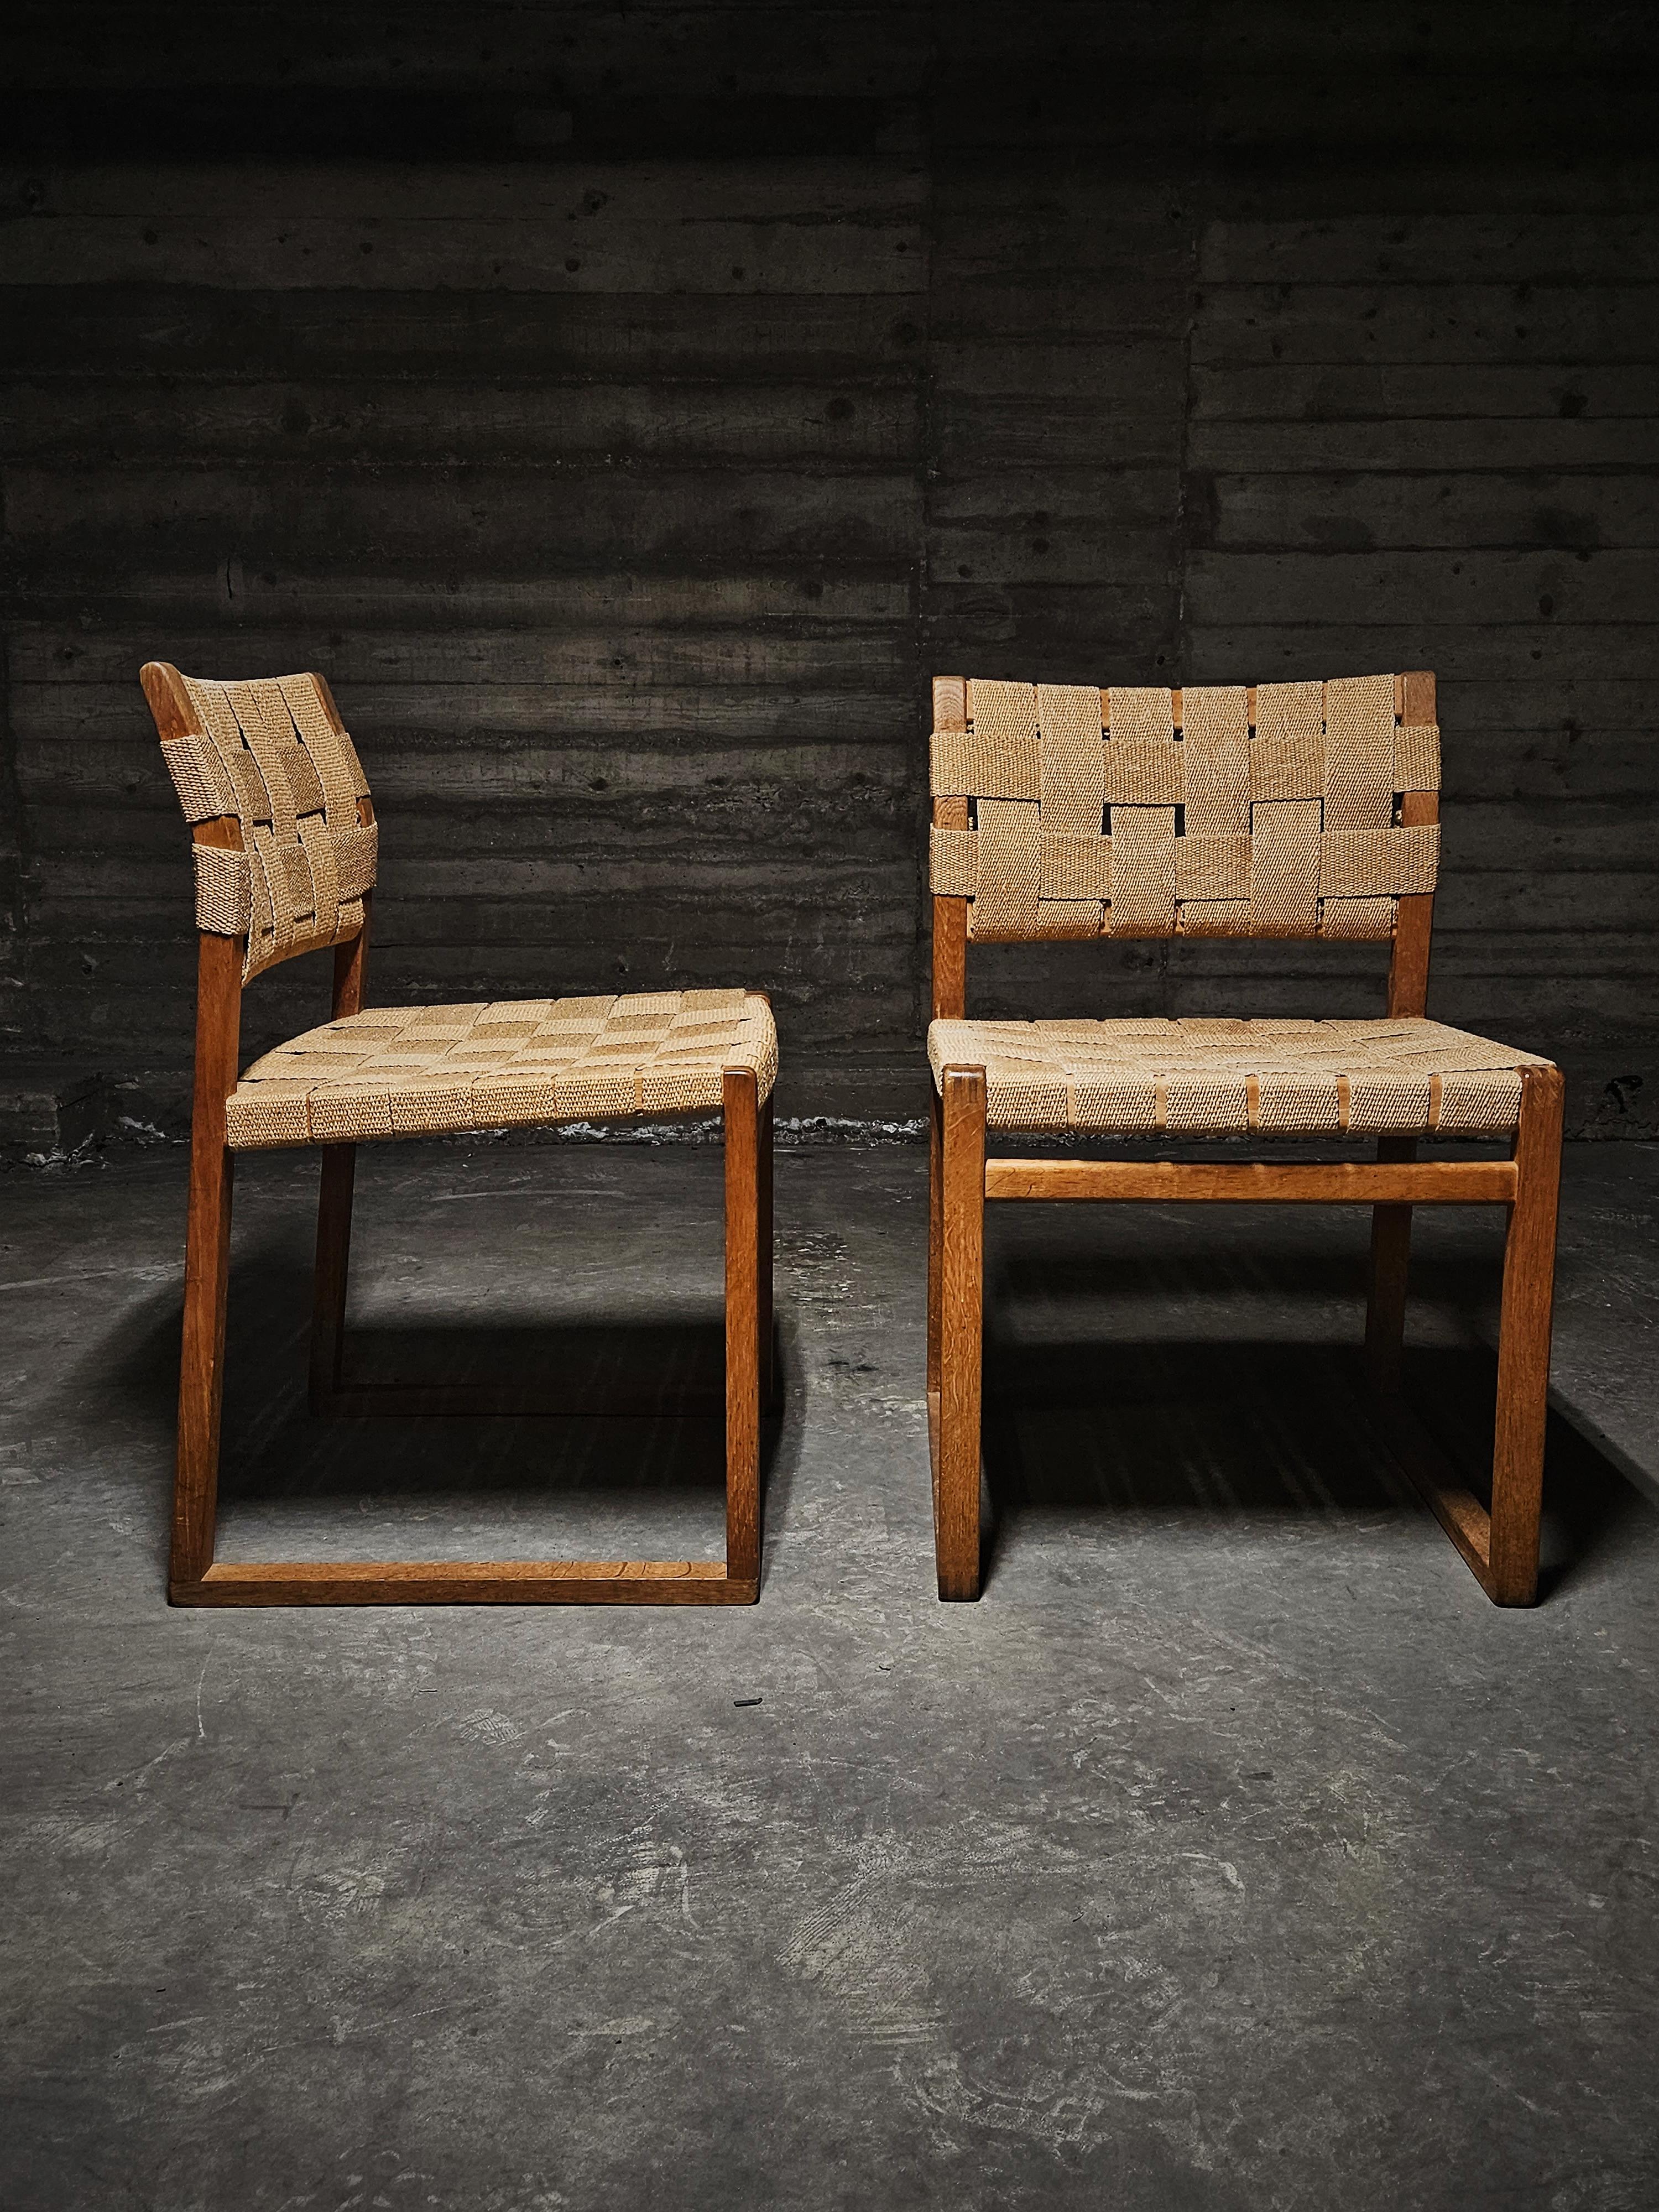 Børge Mogensen for Fredericia, dining chairs model ‘BM 61’, oak, Denmark, 1950s

This naturalistic looking chair is characterized by a splendid design featuring simple shapes and authentic materials. The frame is composed of slender wooden slats